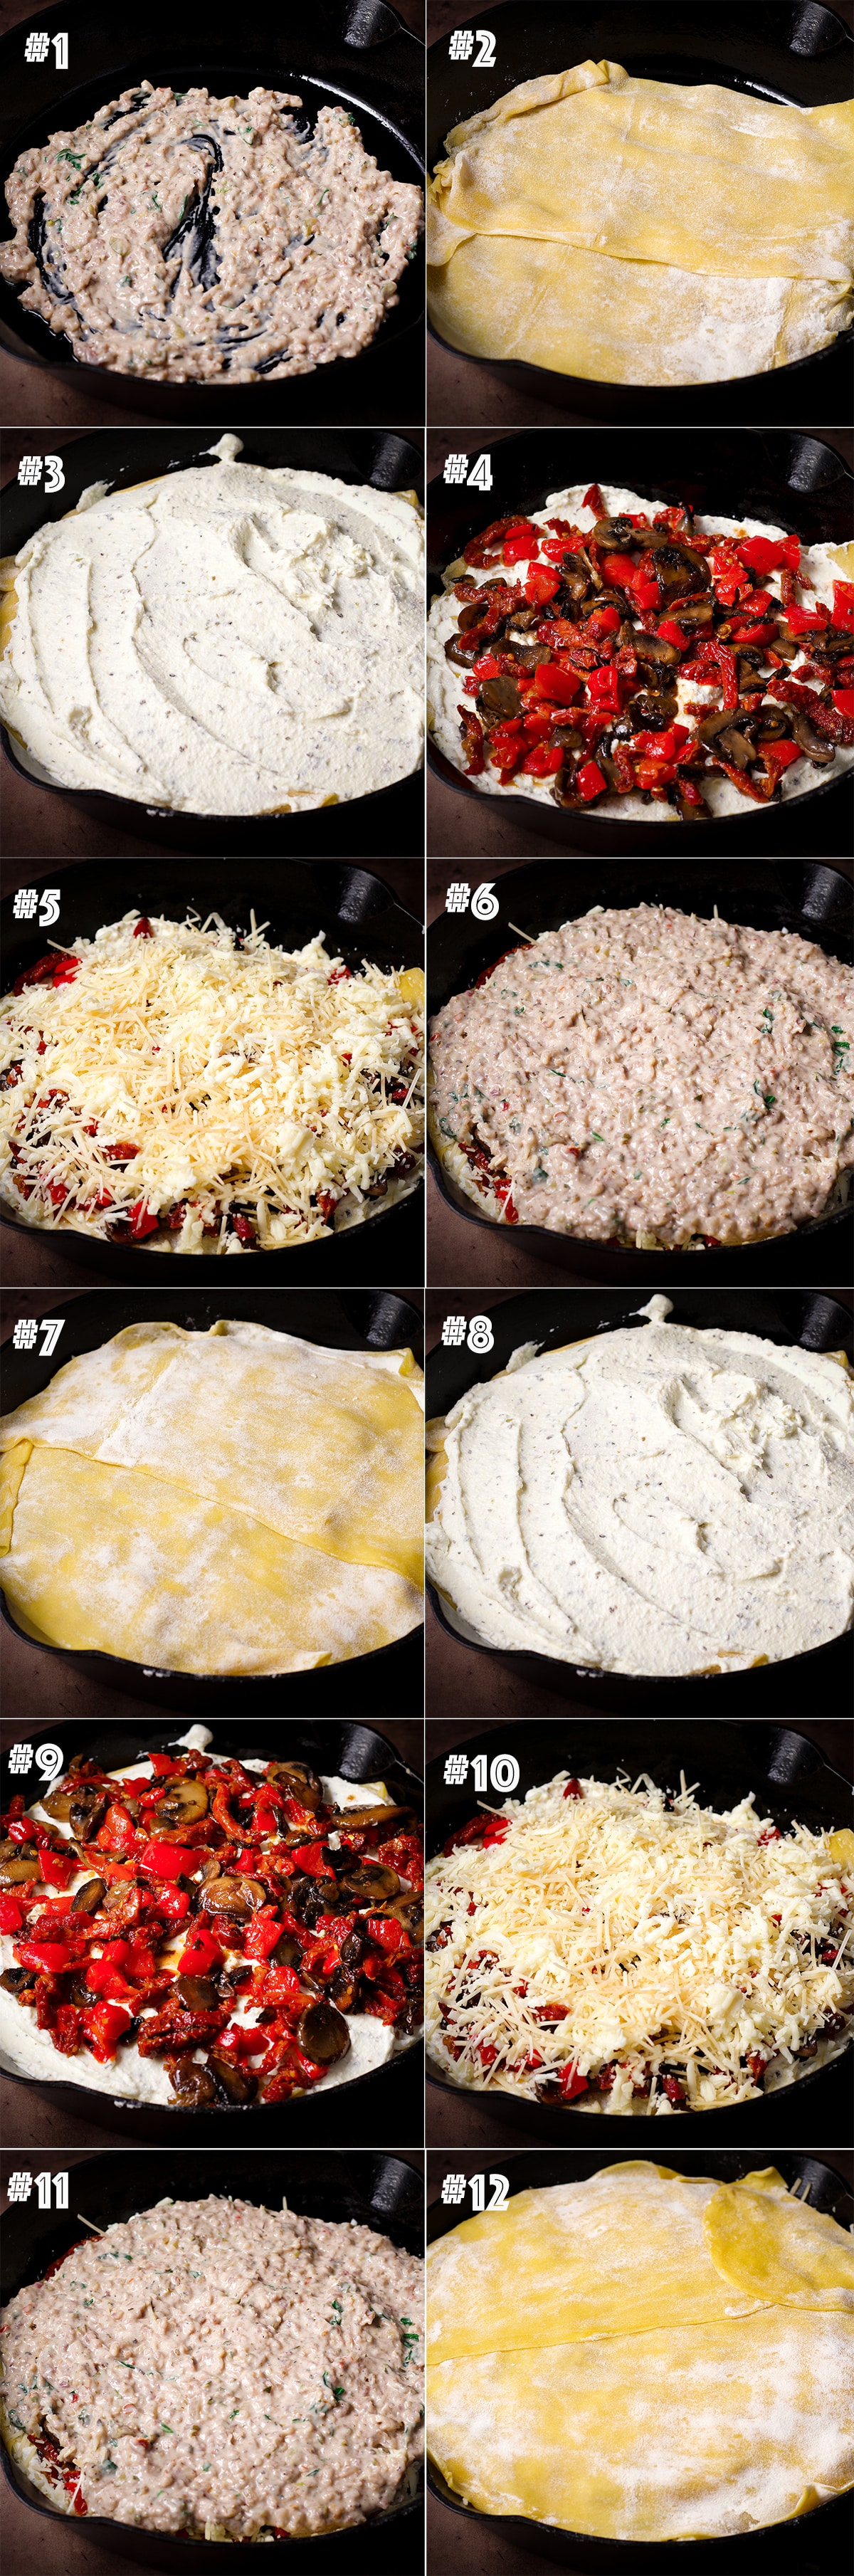 Step-by-step photos showing how to layer this vegetable lasagna in a cast iron skillet.